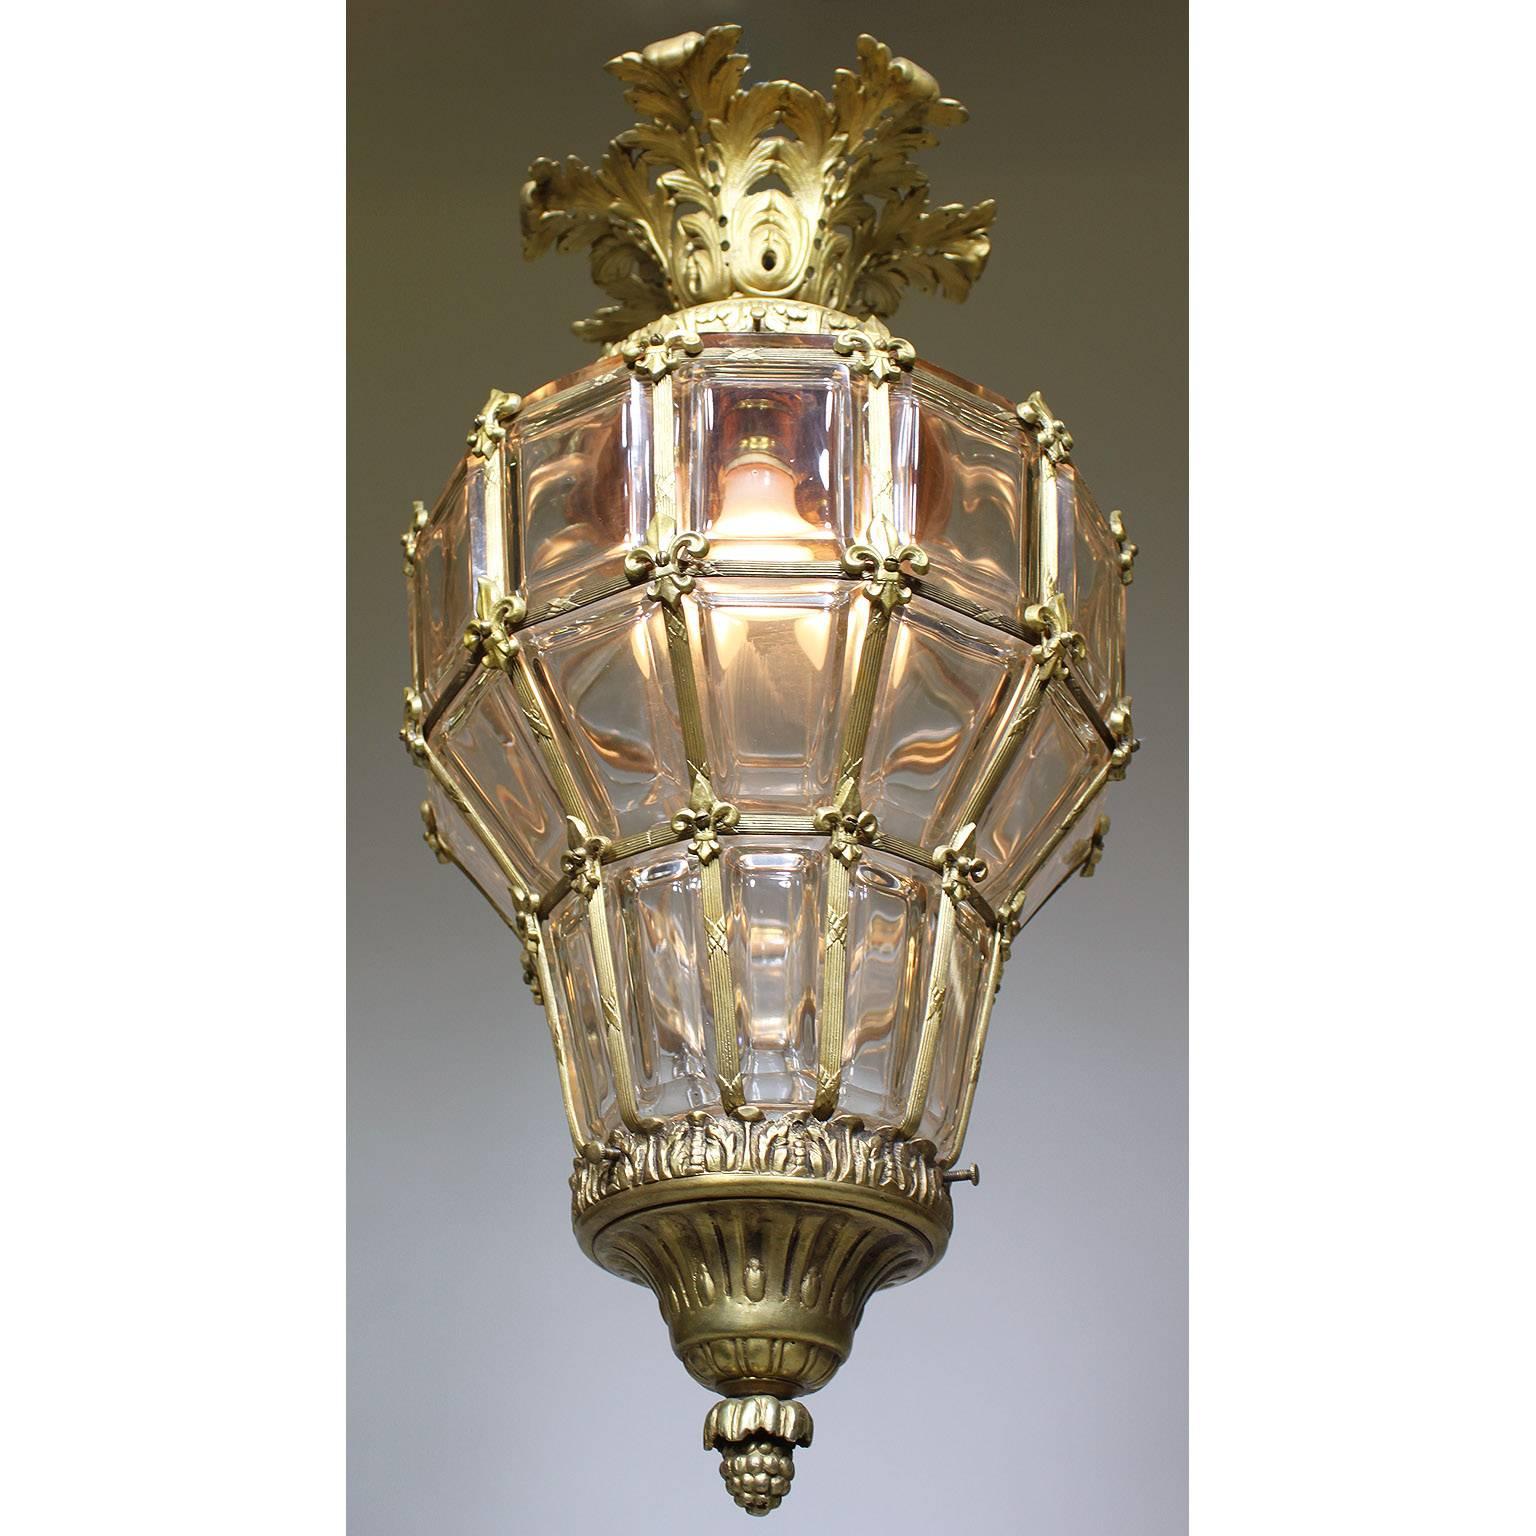 A charming French, early 20th century, Louis XIV style gilt bronze and gilt metal molded glass 